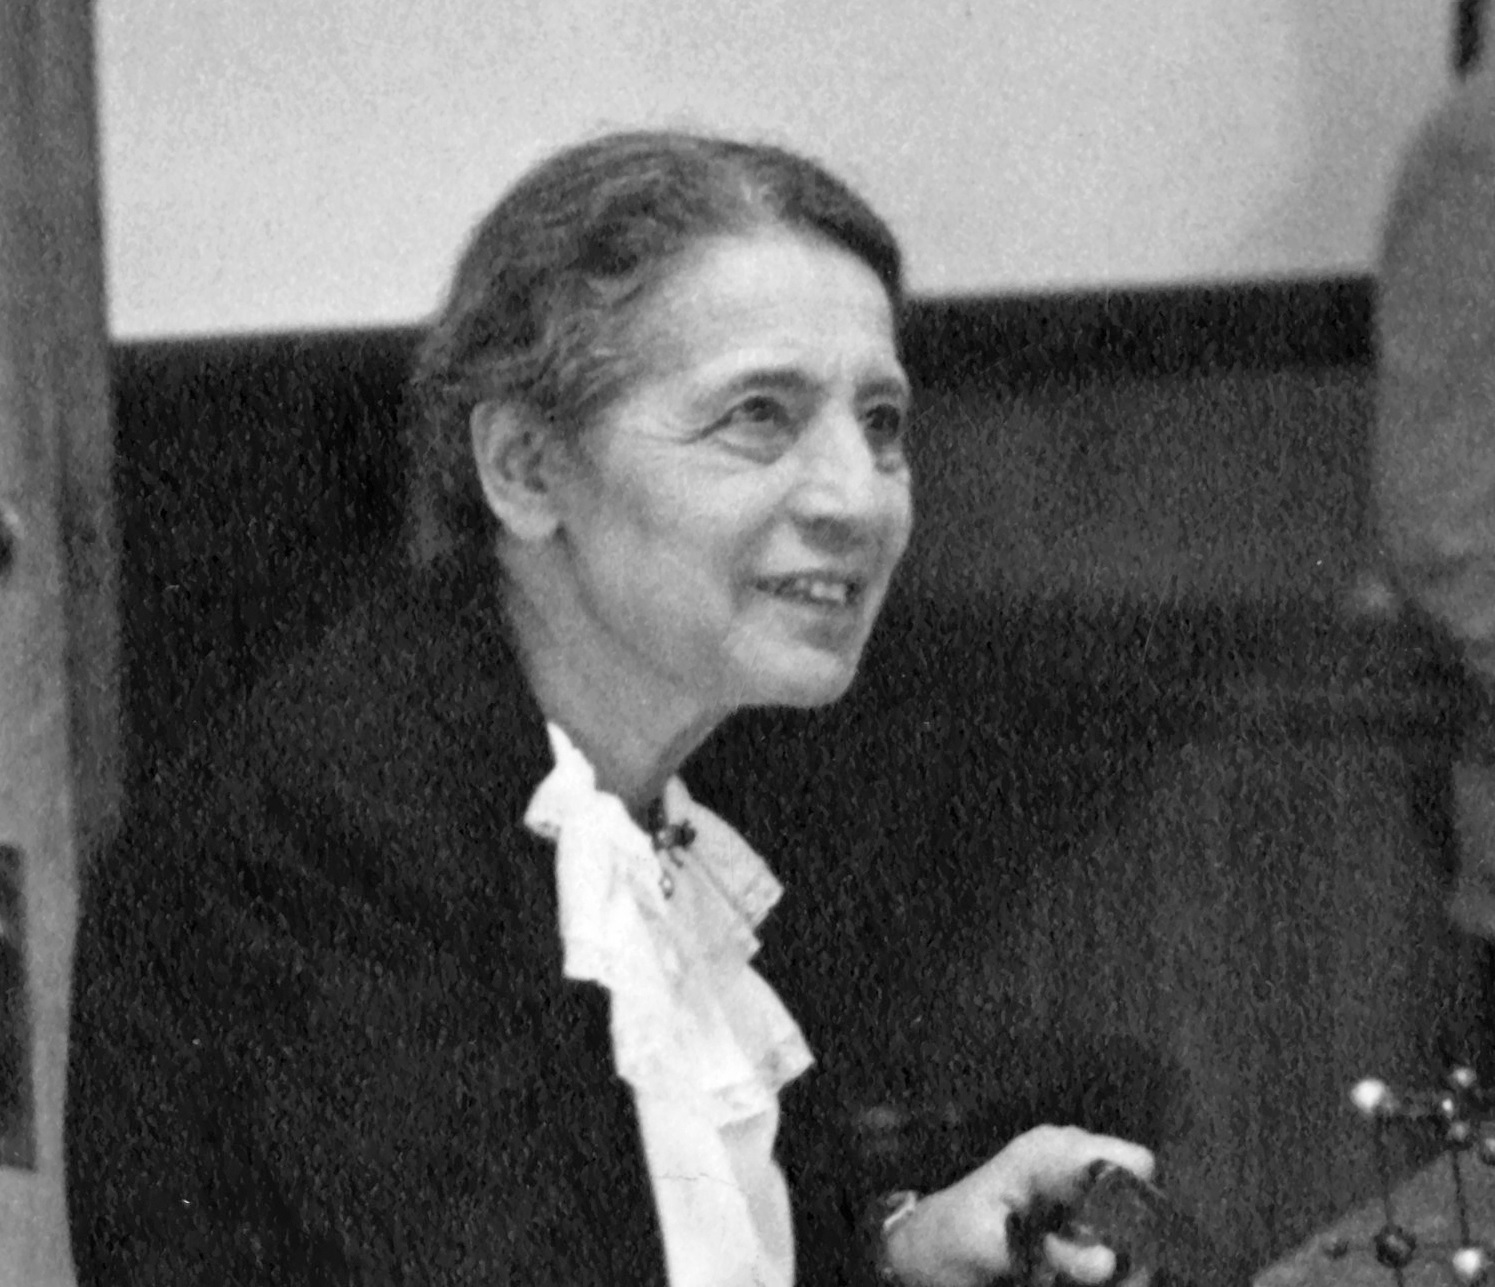 Lise Meitner: One of the Most Important Nuclear Physicists in History